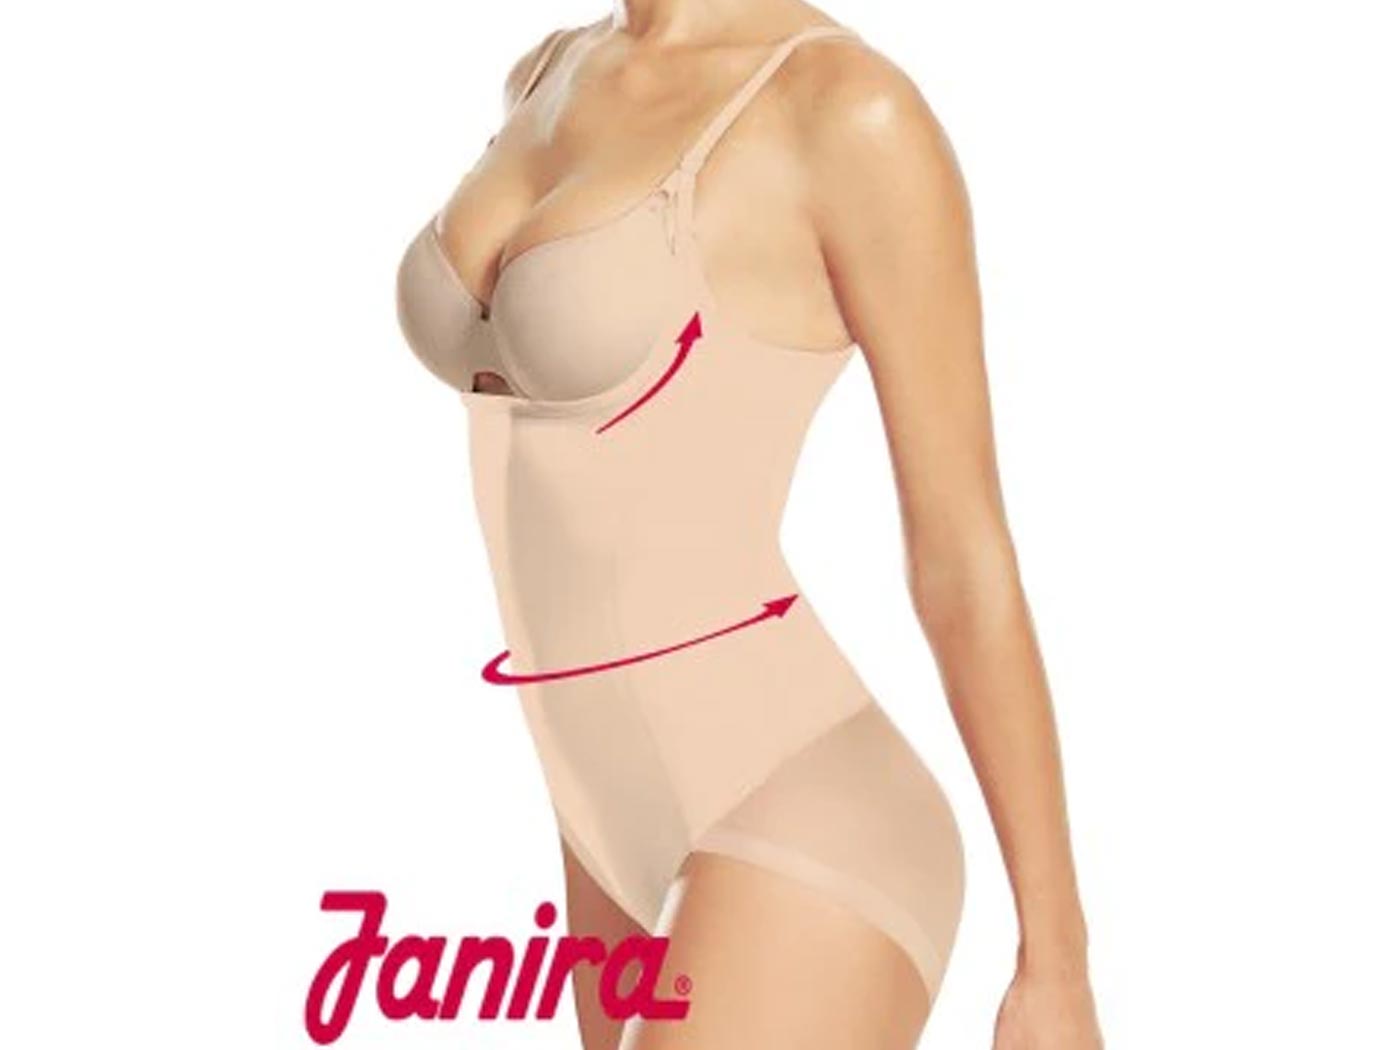 Streamline your silhouette with our top shapewear must haves from Janira